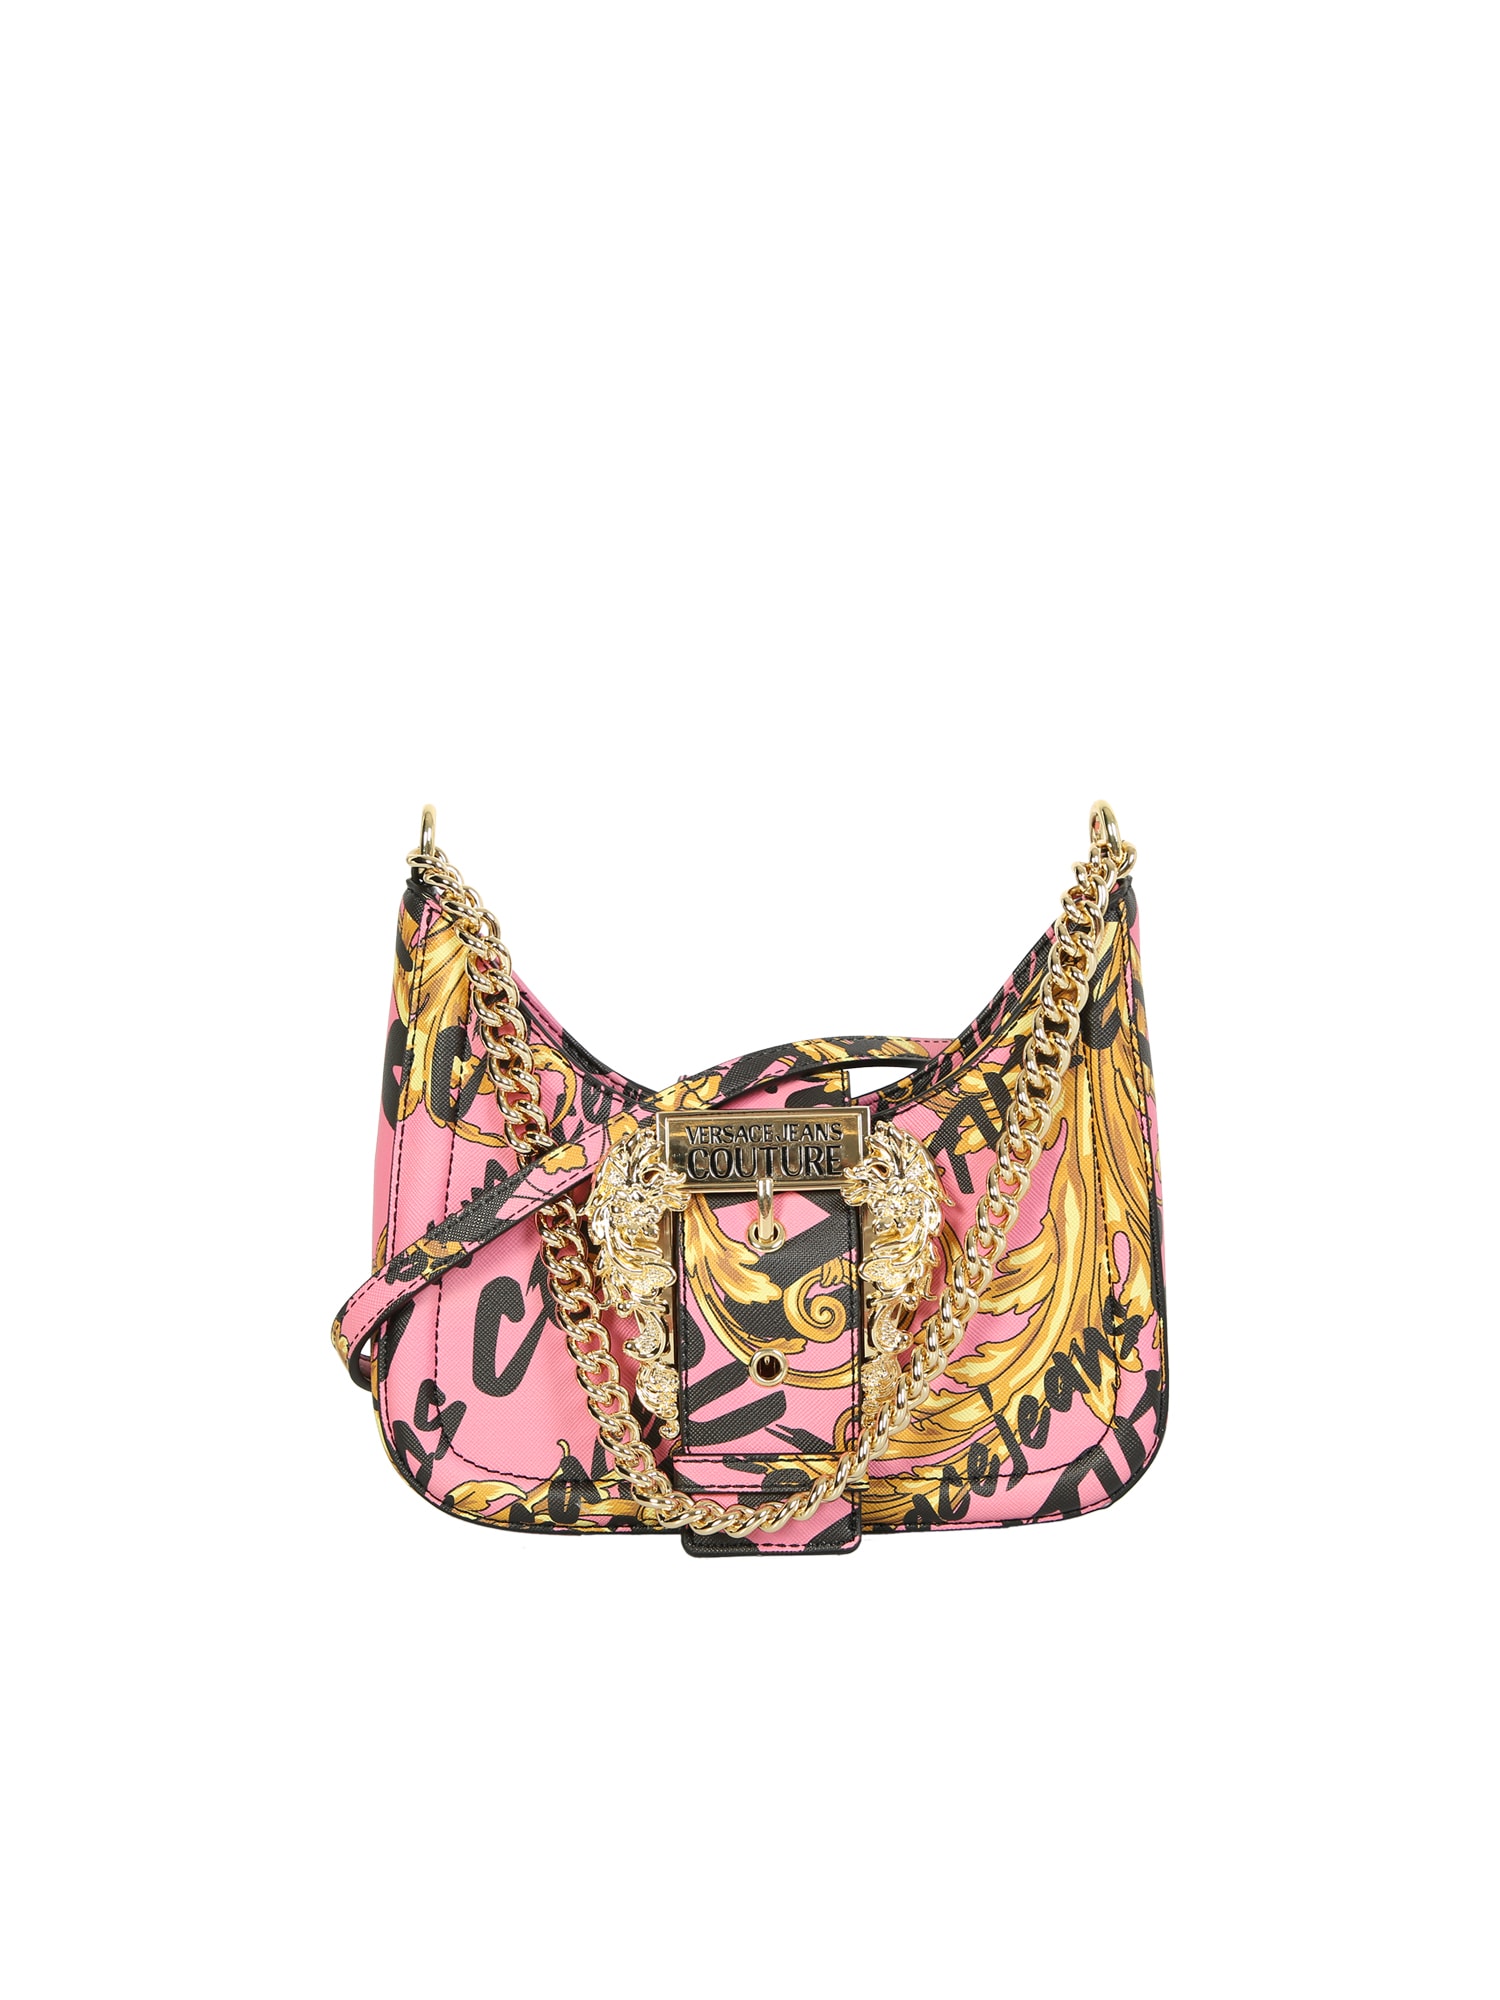 Sketch Bag With Iconic Versace Jeans Couture Baroque Motif